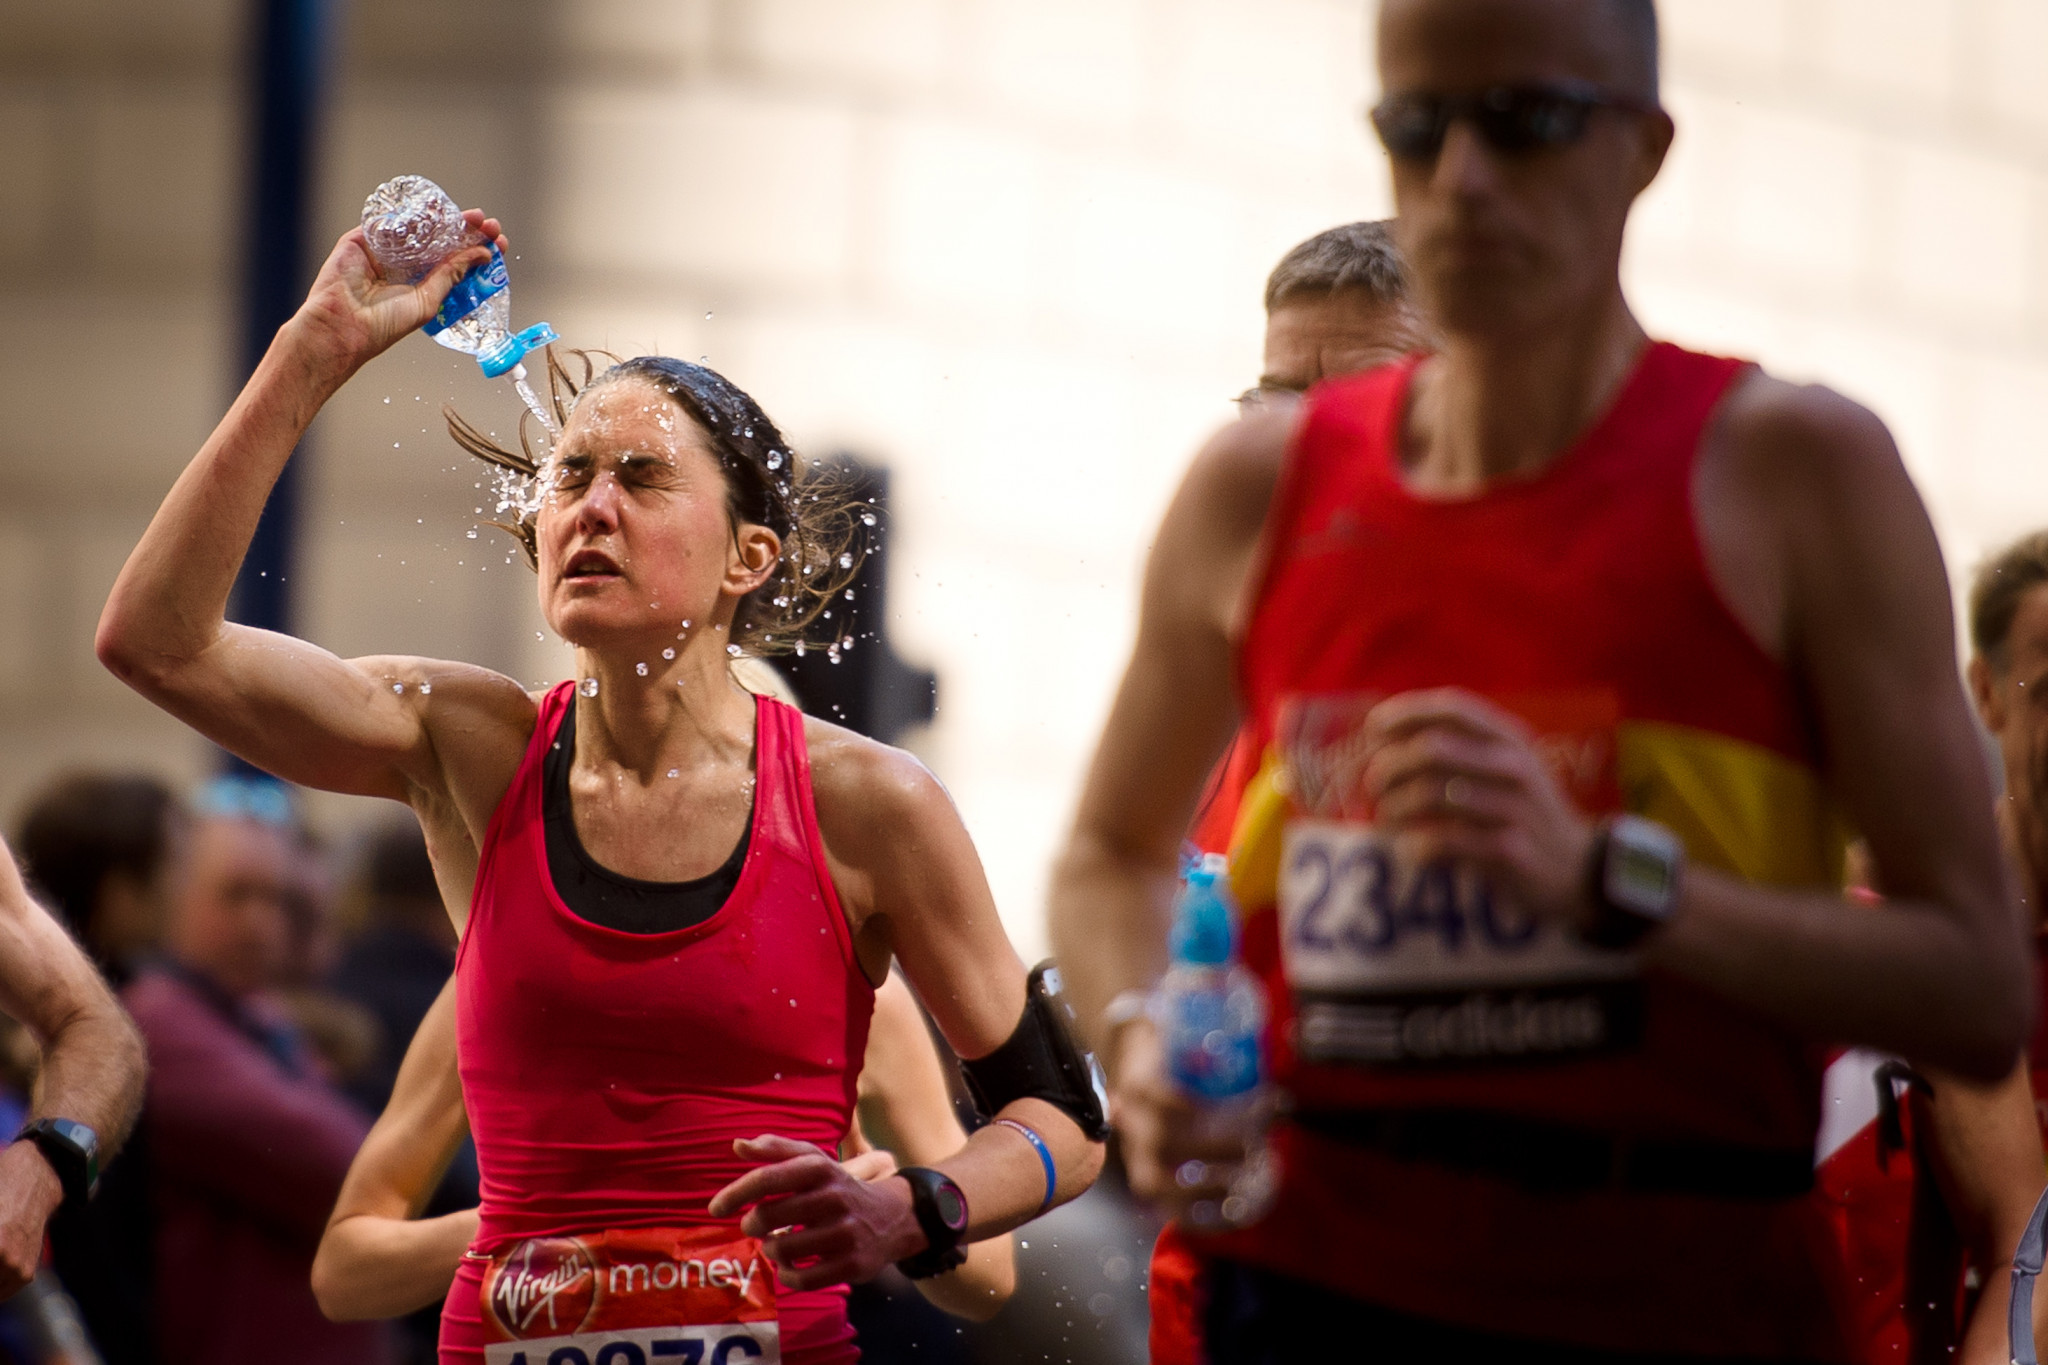 London Marathon organisers want all participants to use the bottle belts at this year's event, scheduled to be held on October 3 ©Getty Images